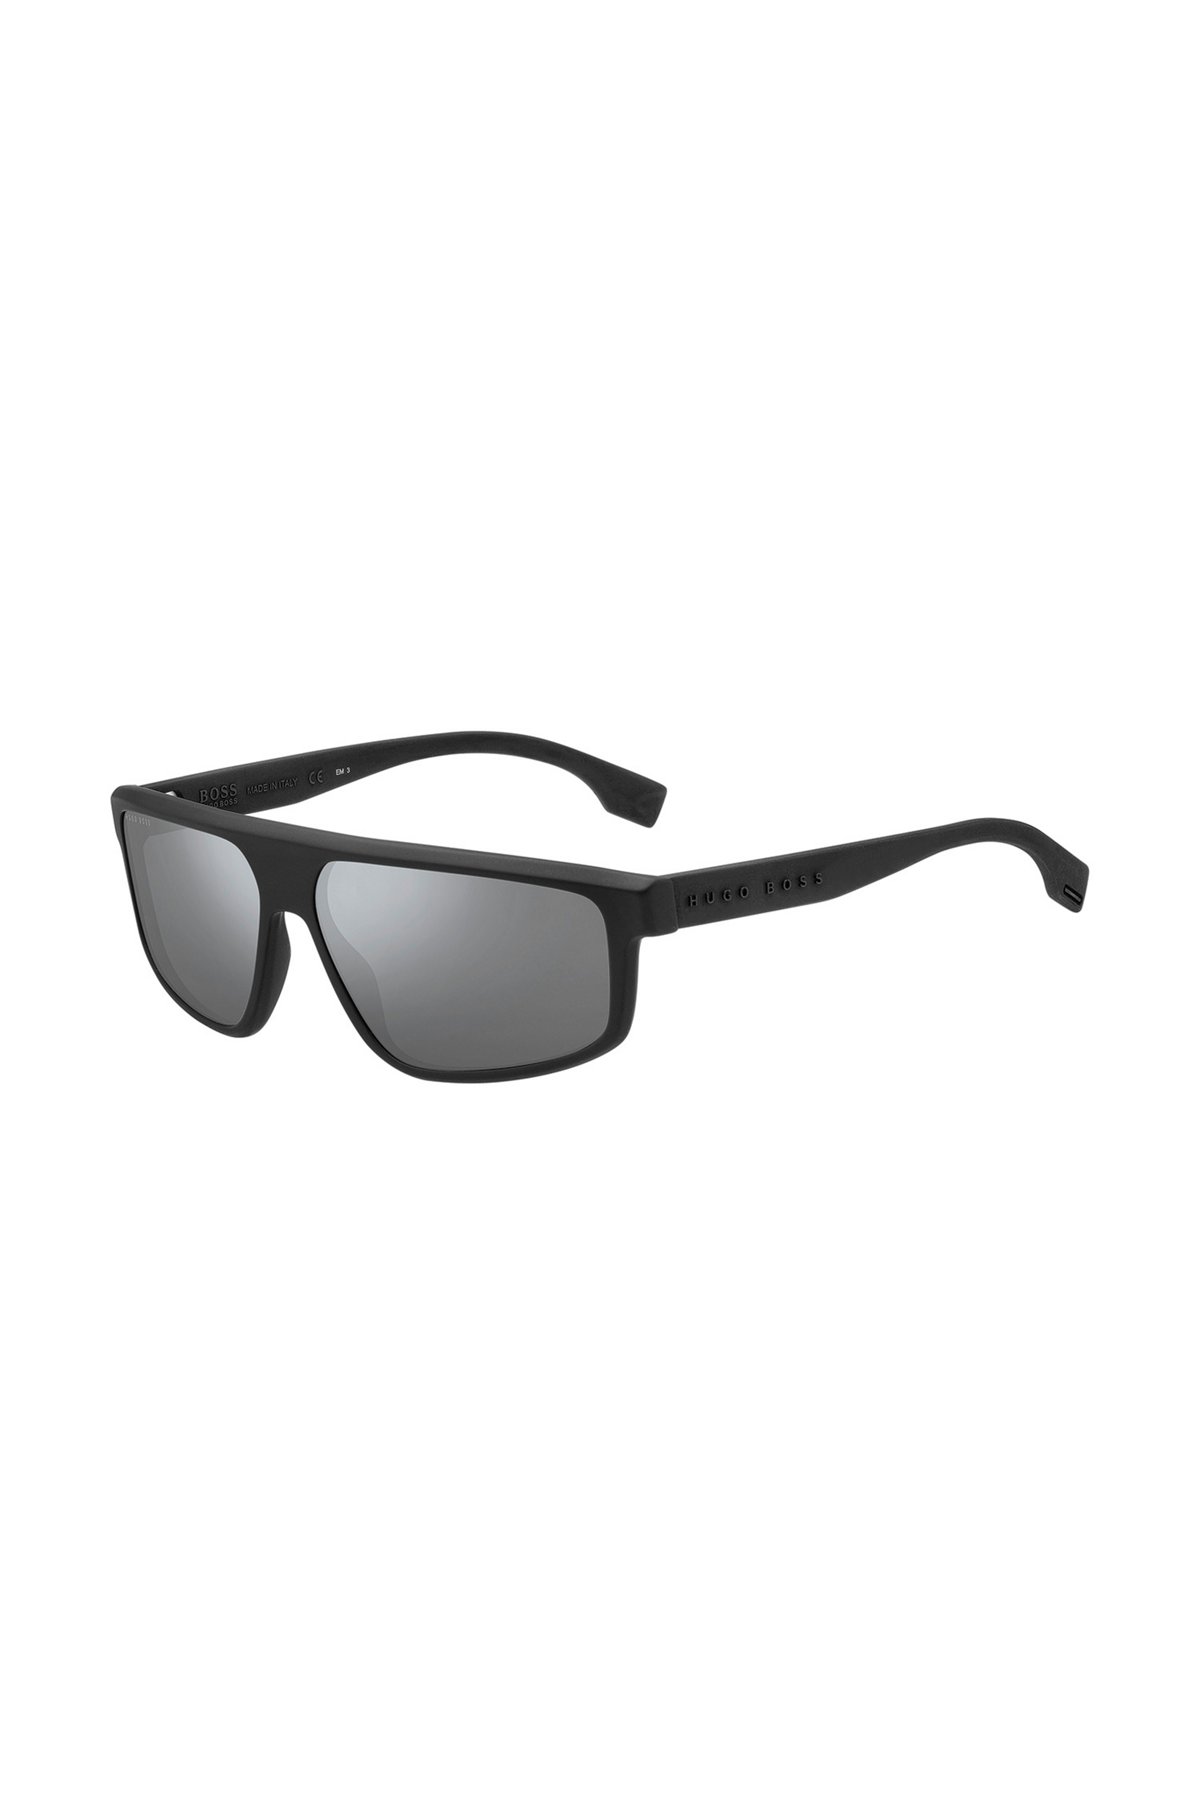 Black sunglasses with 3D temple logo, Assorted-Pre-Pack